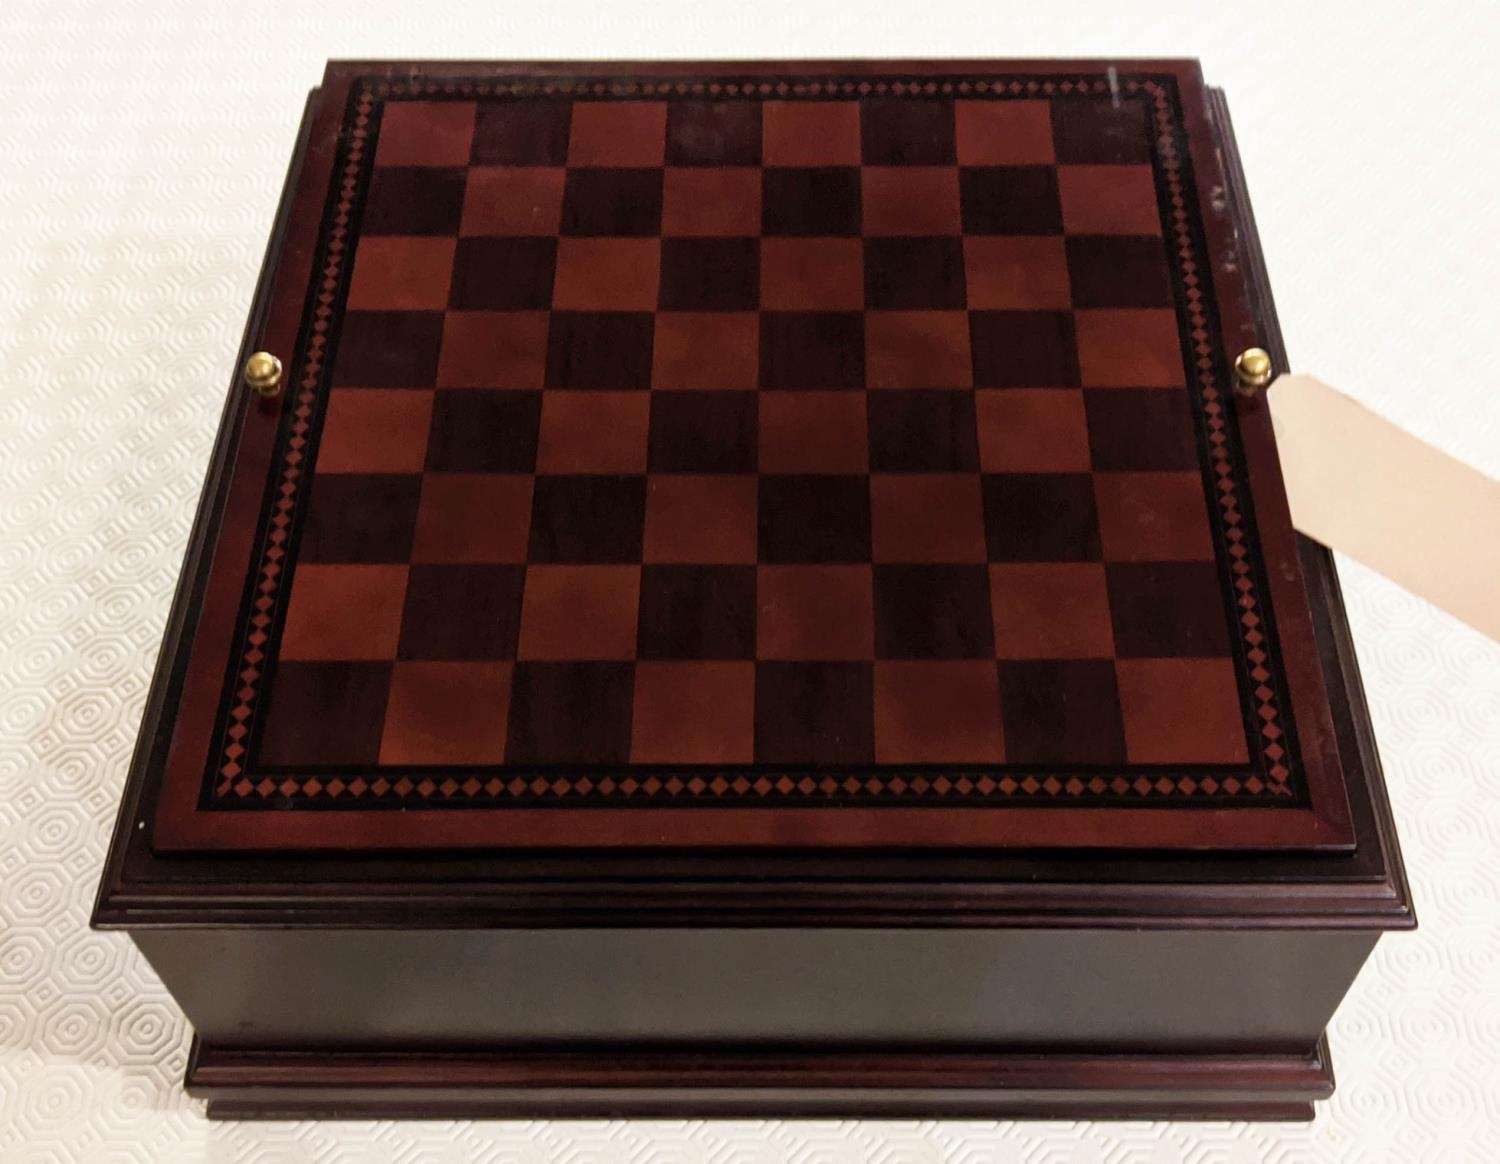 GAMES SET, 41cm x 41cm x 18cm, with chess and back gammon boards, two compartments, one containing - Image 6 of 9